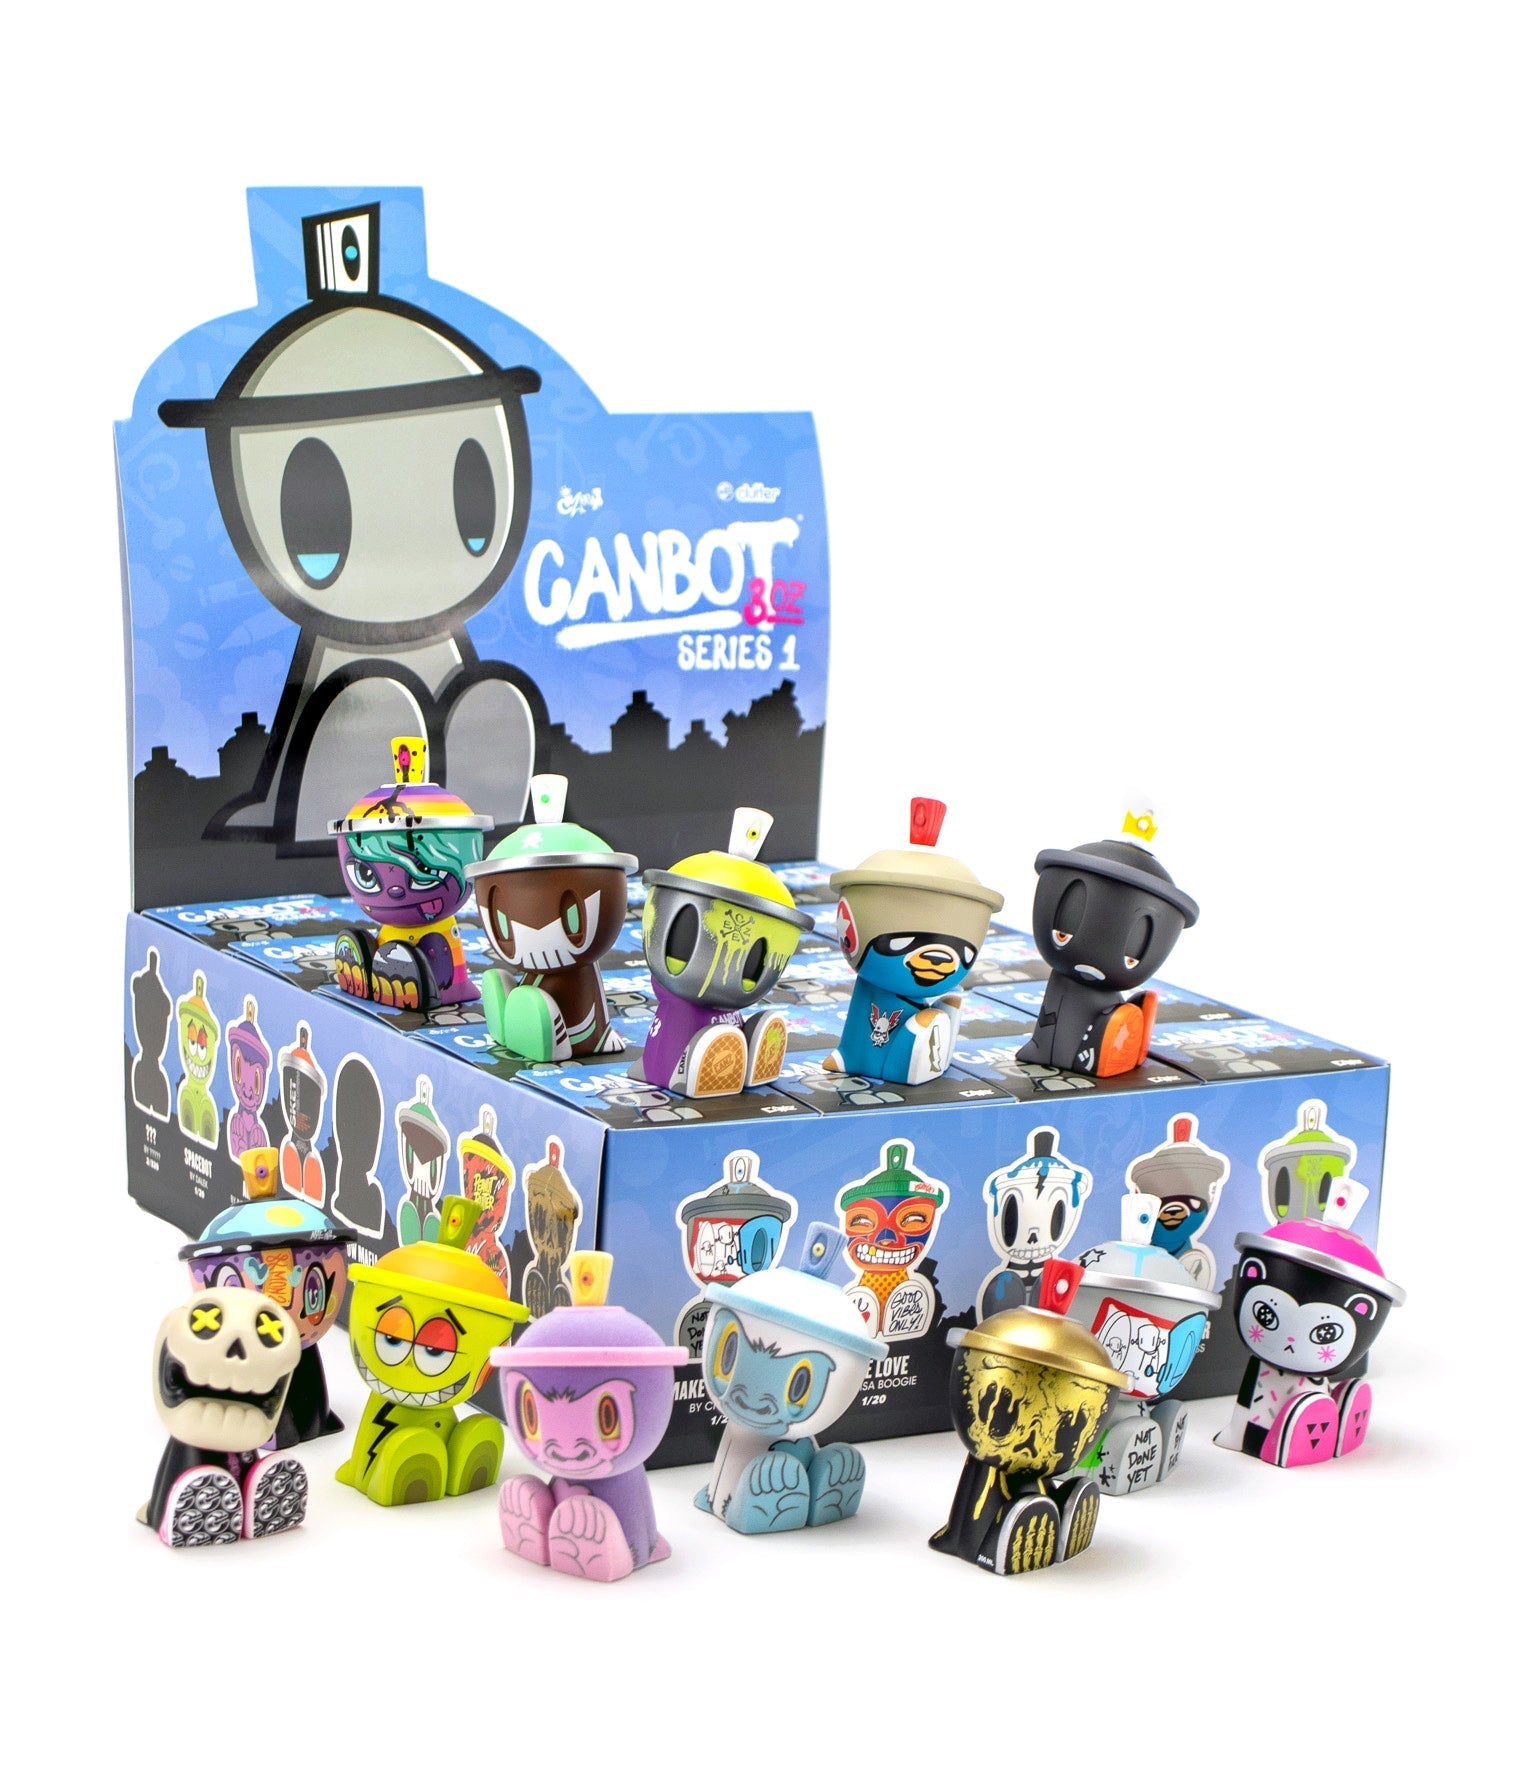 Canbot 3oz Blind Box Series 1 by Clutter Full 20 Piece Display Case Available Now